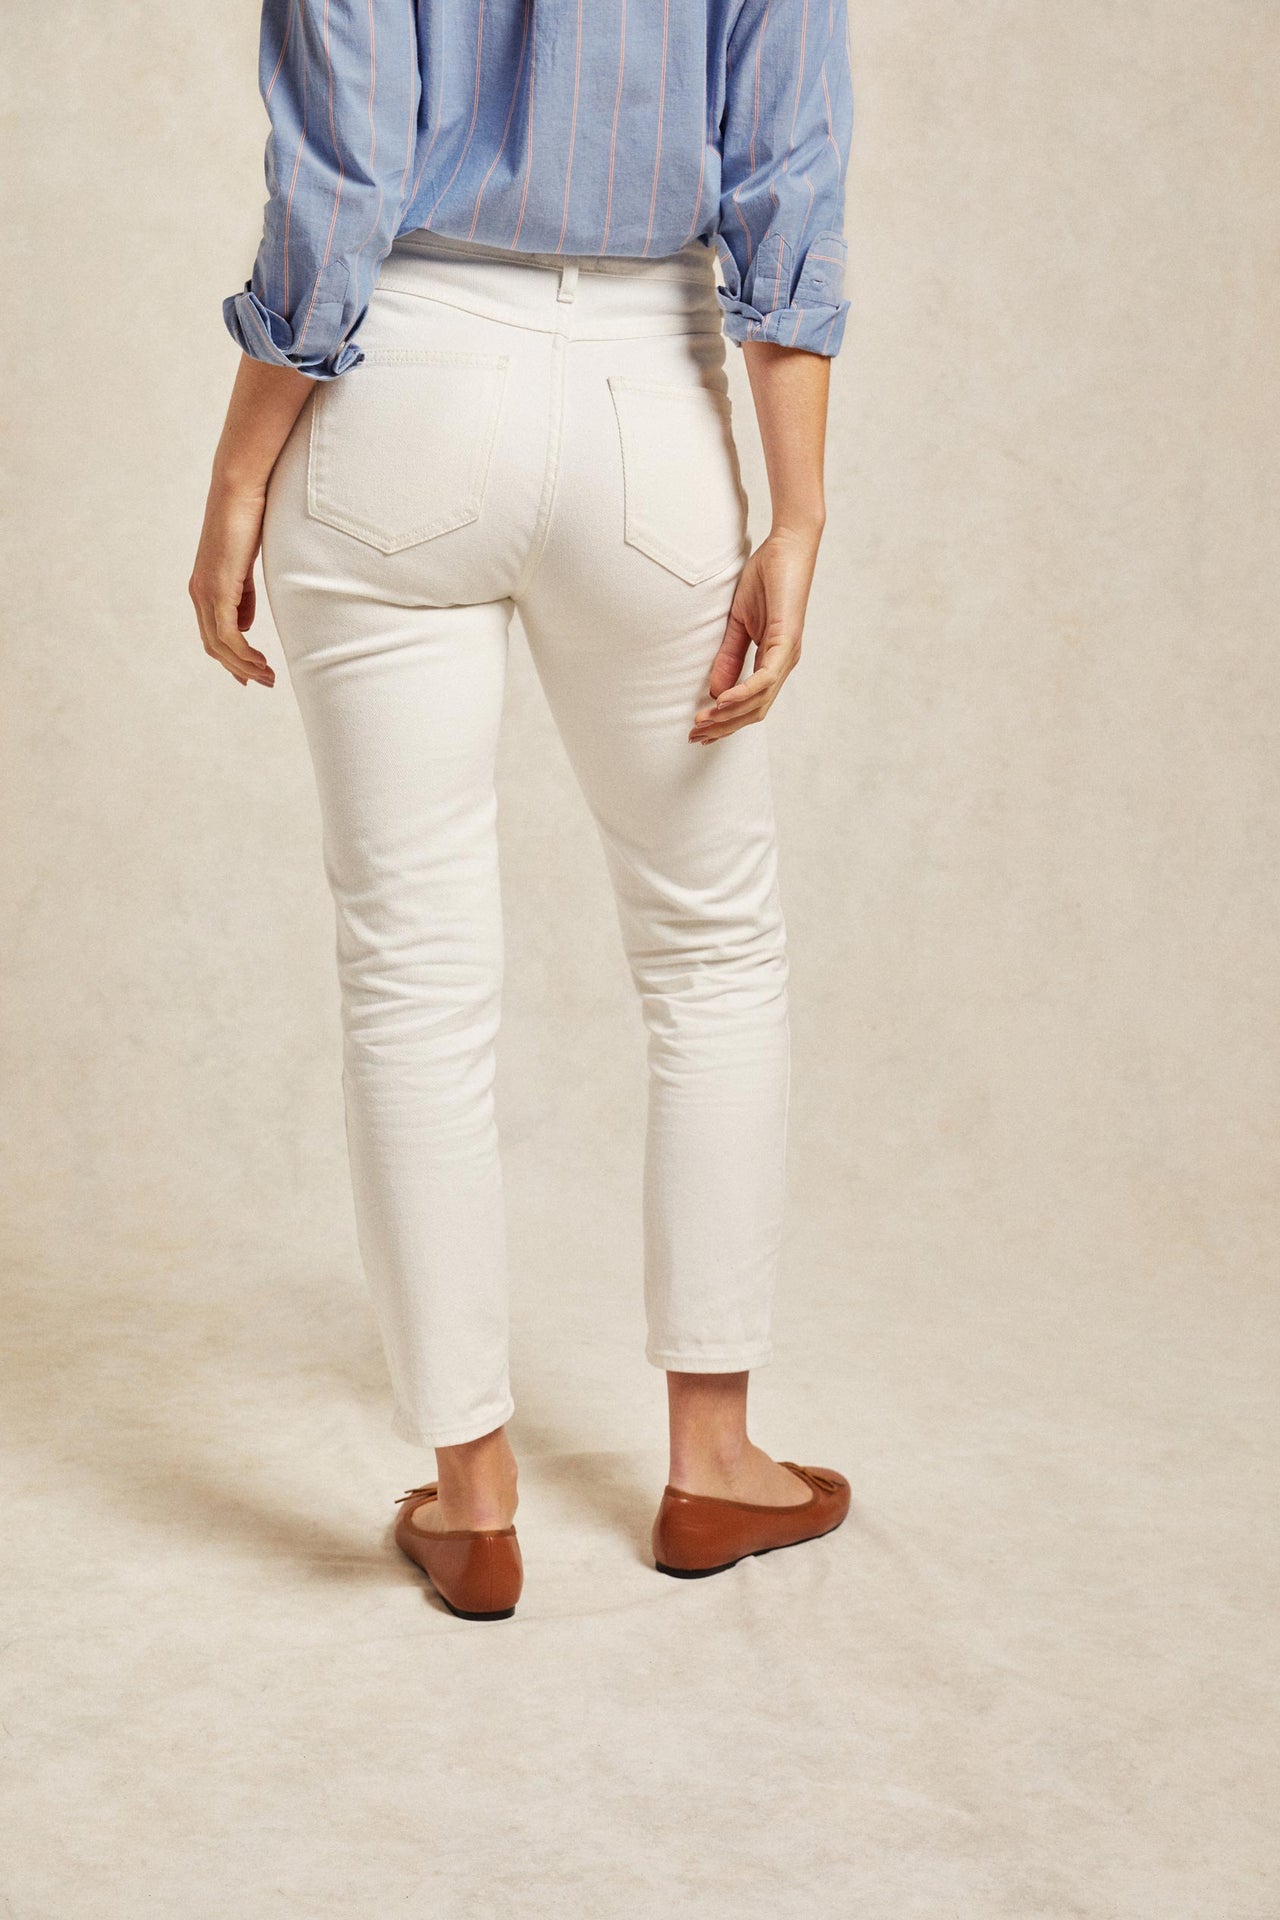 Sway ecru white jeans, high waisted with a slim, slightly tapered leg, made from authentic non-stretch 100% cotton denim. Mid-rise, ankle length, classic mom jeans. Smart casual wear. Size 6,8,10,12,14,16,18. Made in Portugal. Machine wash.